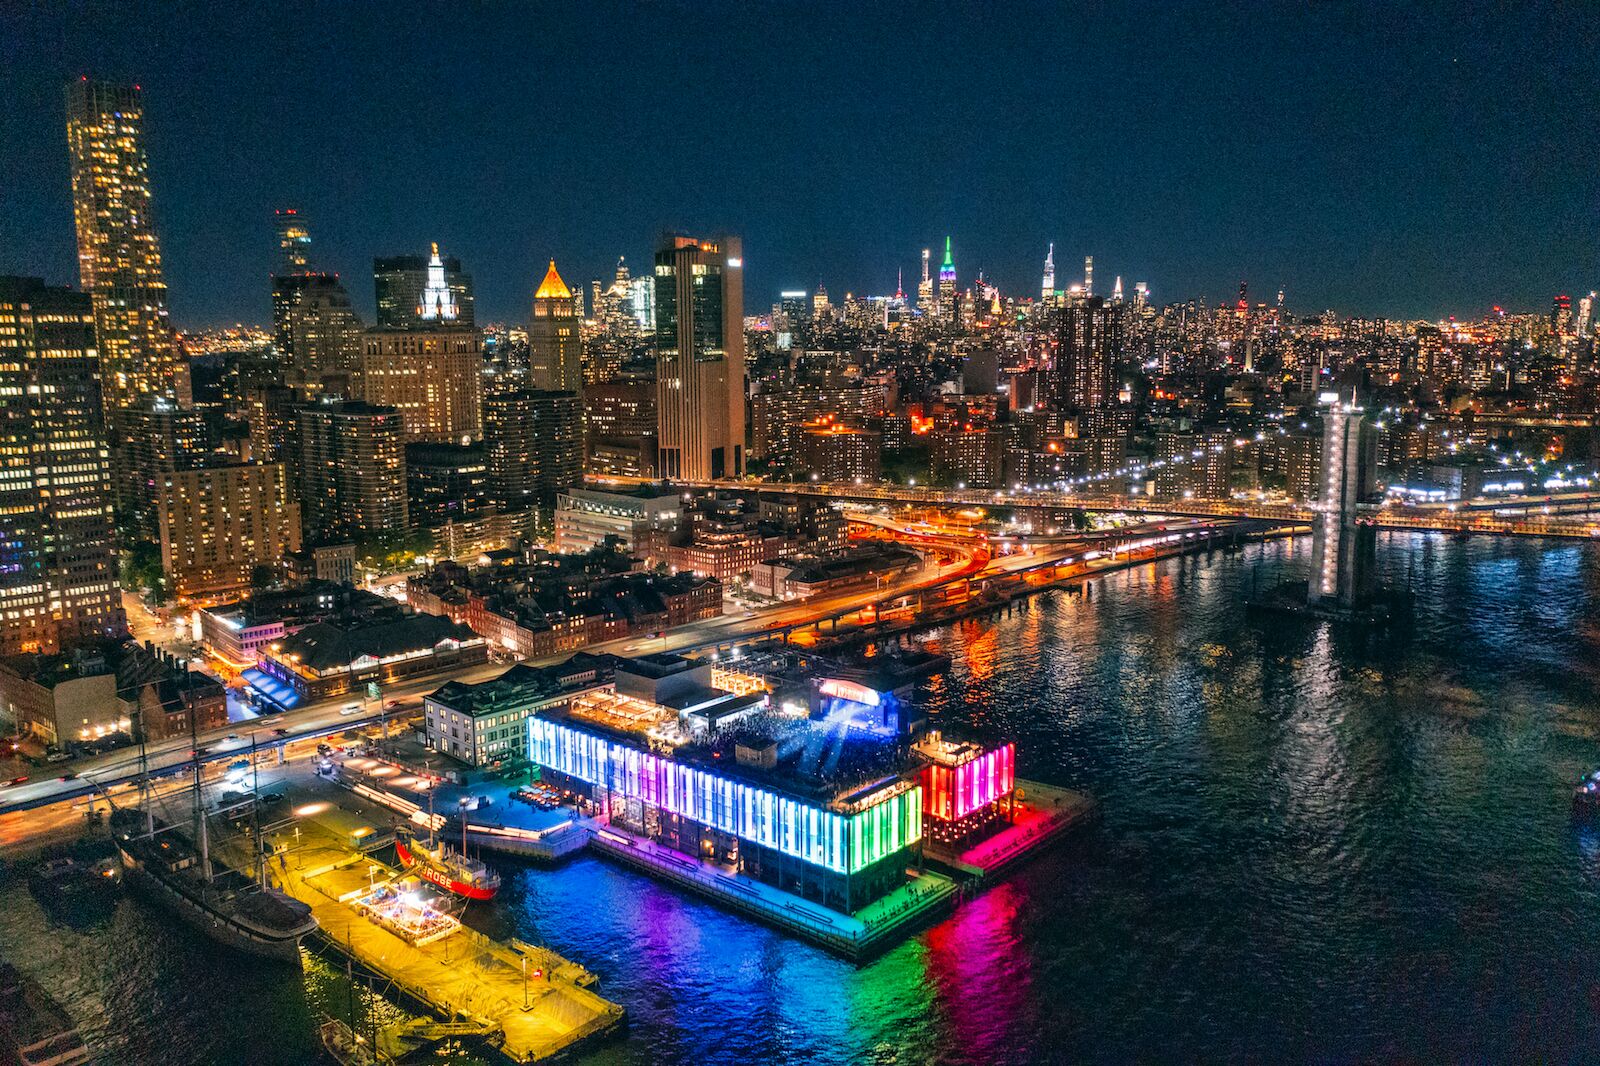 An ariel view of the South Street Seaport at night